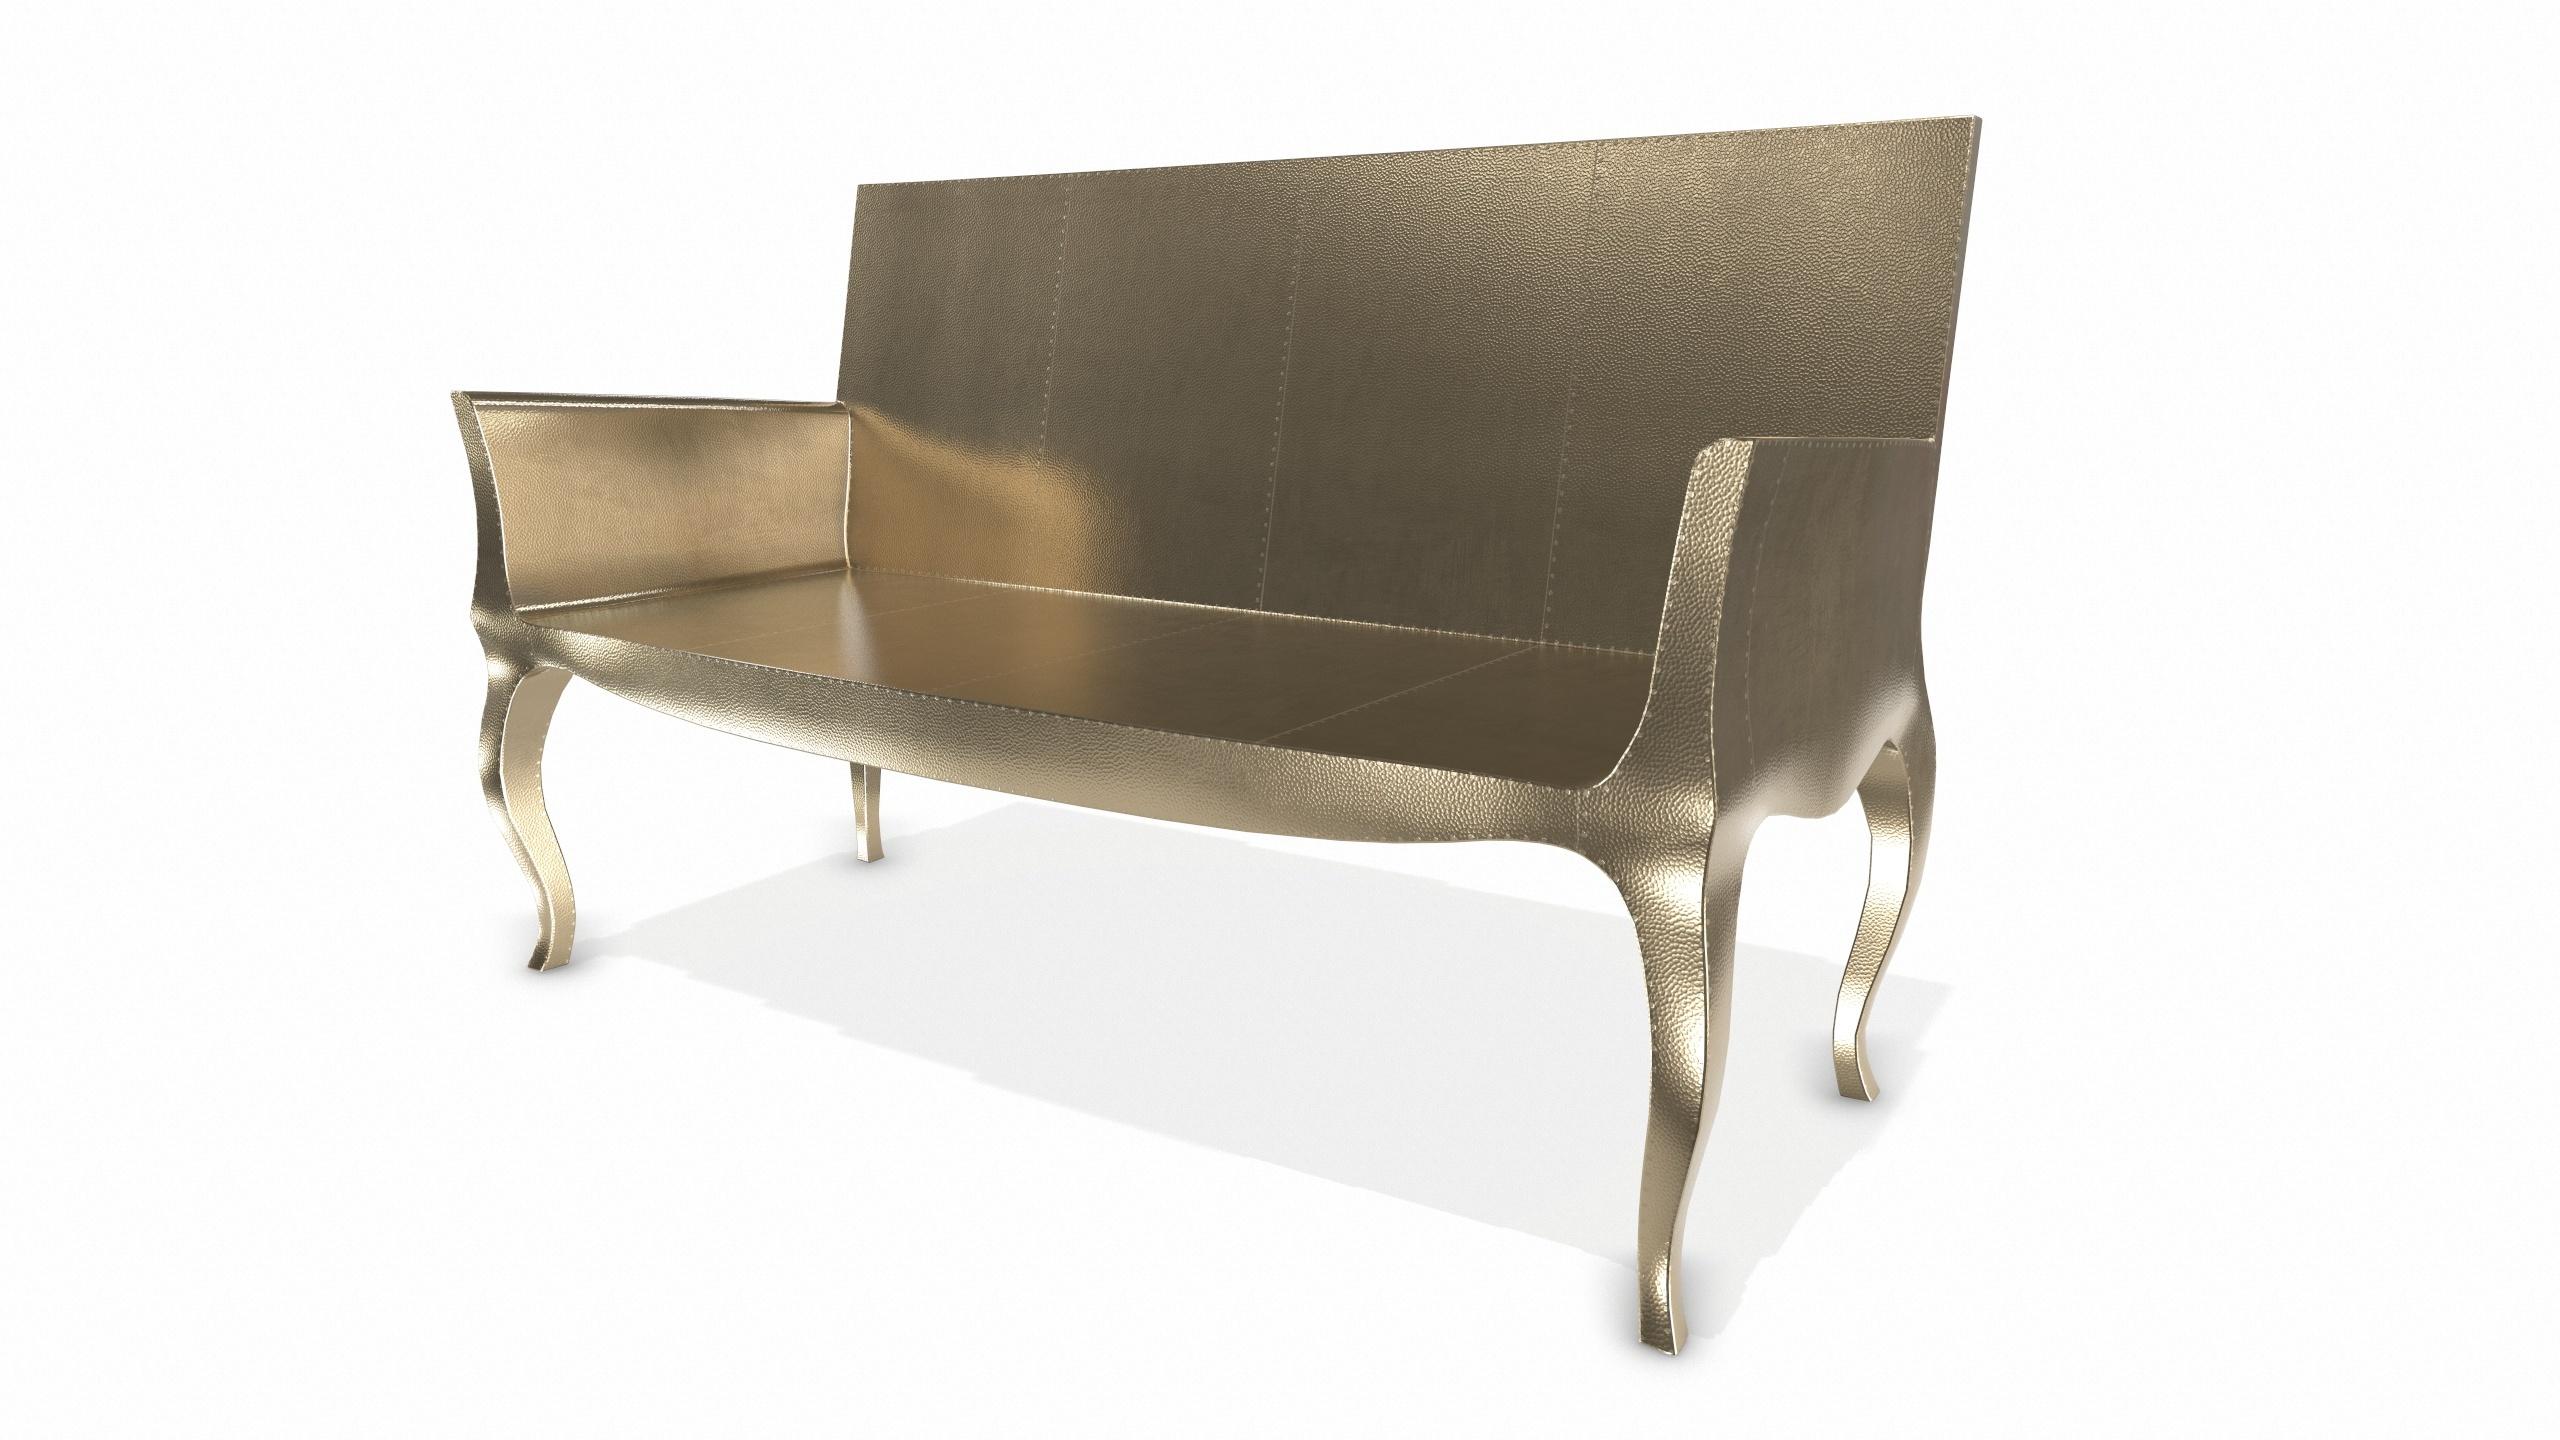 American Louise Settee Art Deco Canapes in Mid. Hammered Brass by Paul Mathieu For Sale